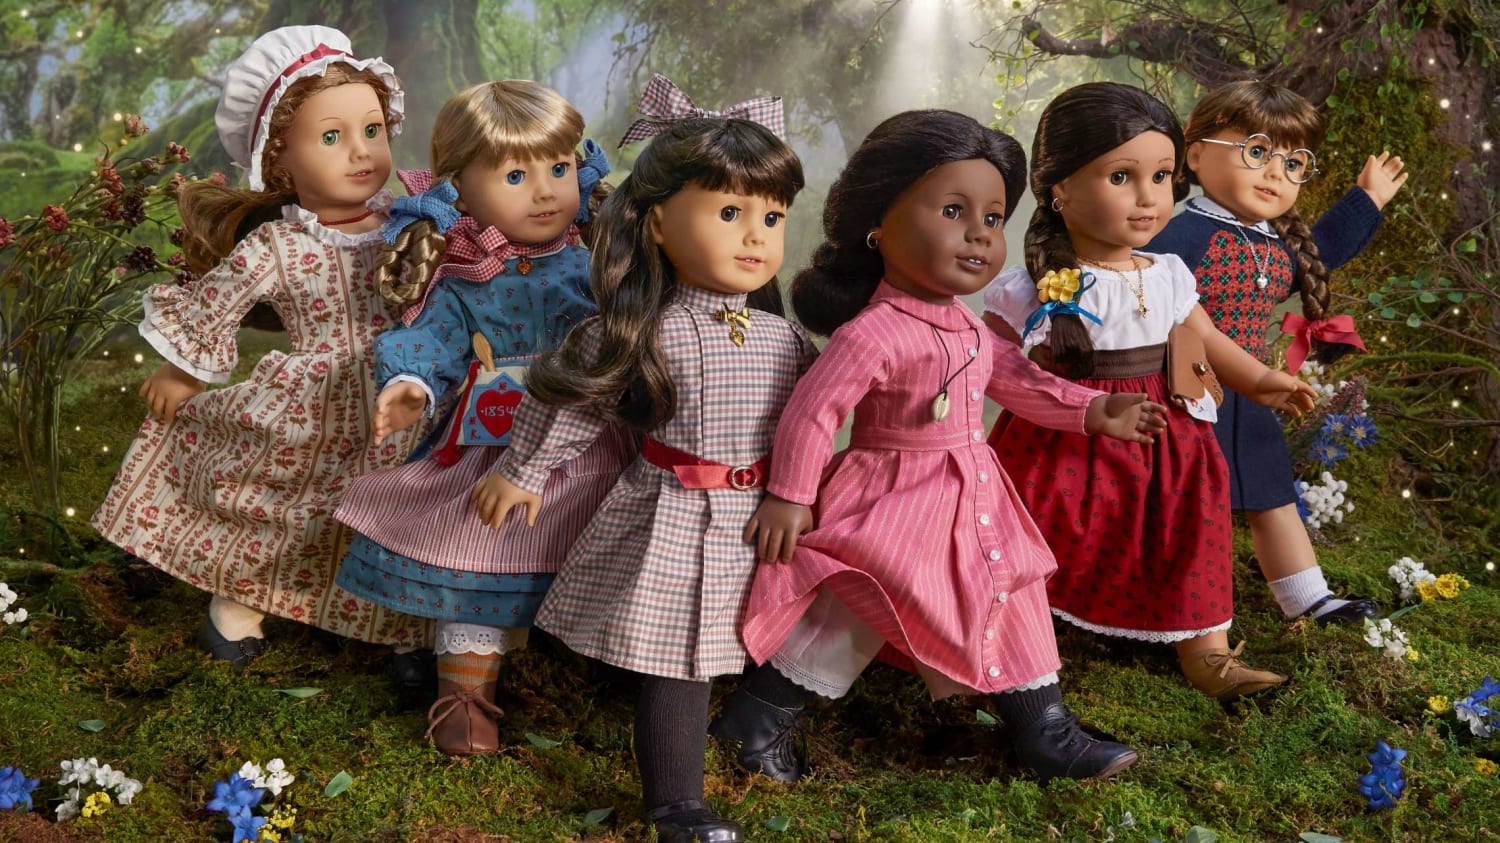 The 6 Original American Girl Dolls Are Back on the Market